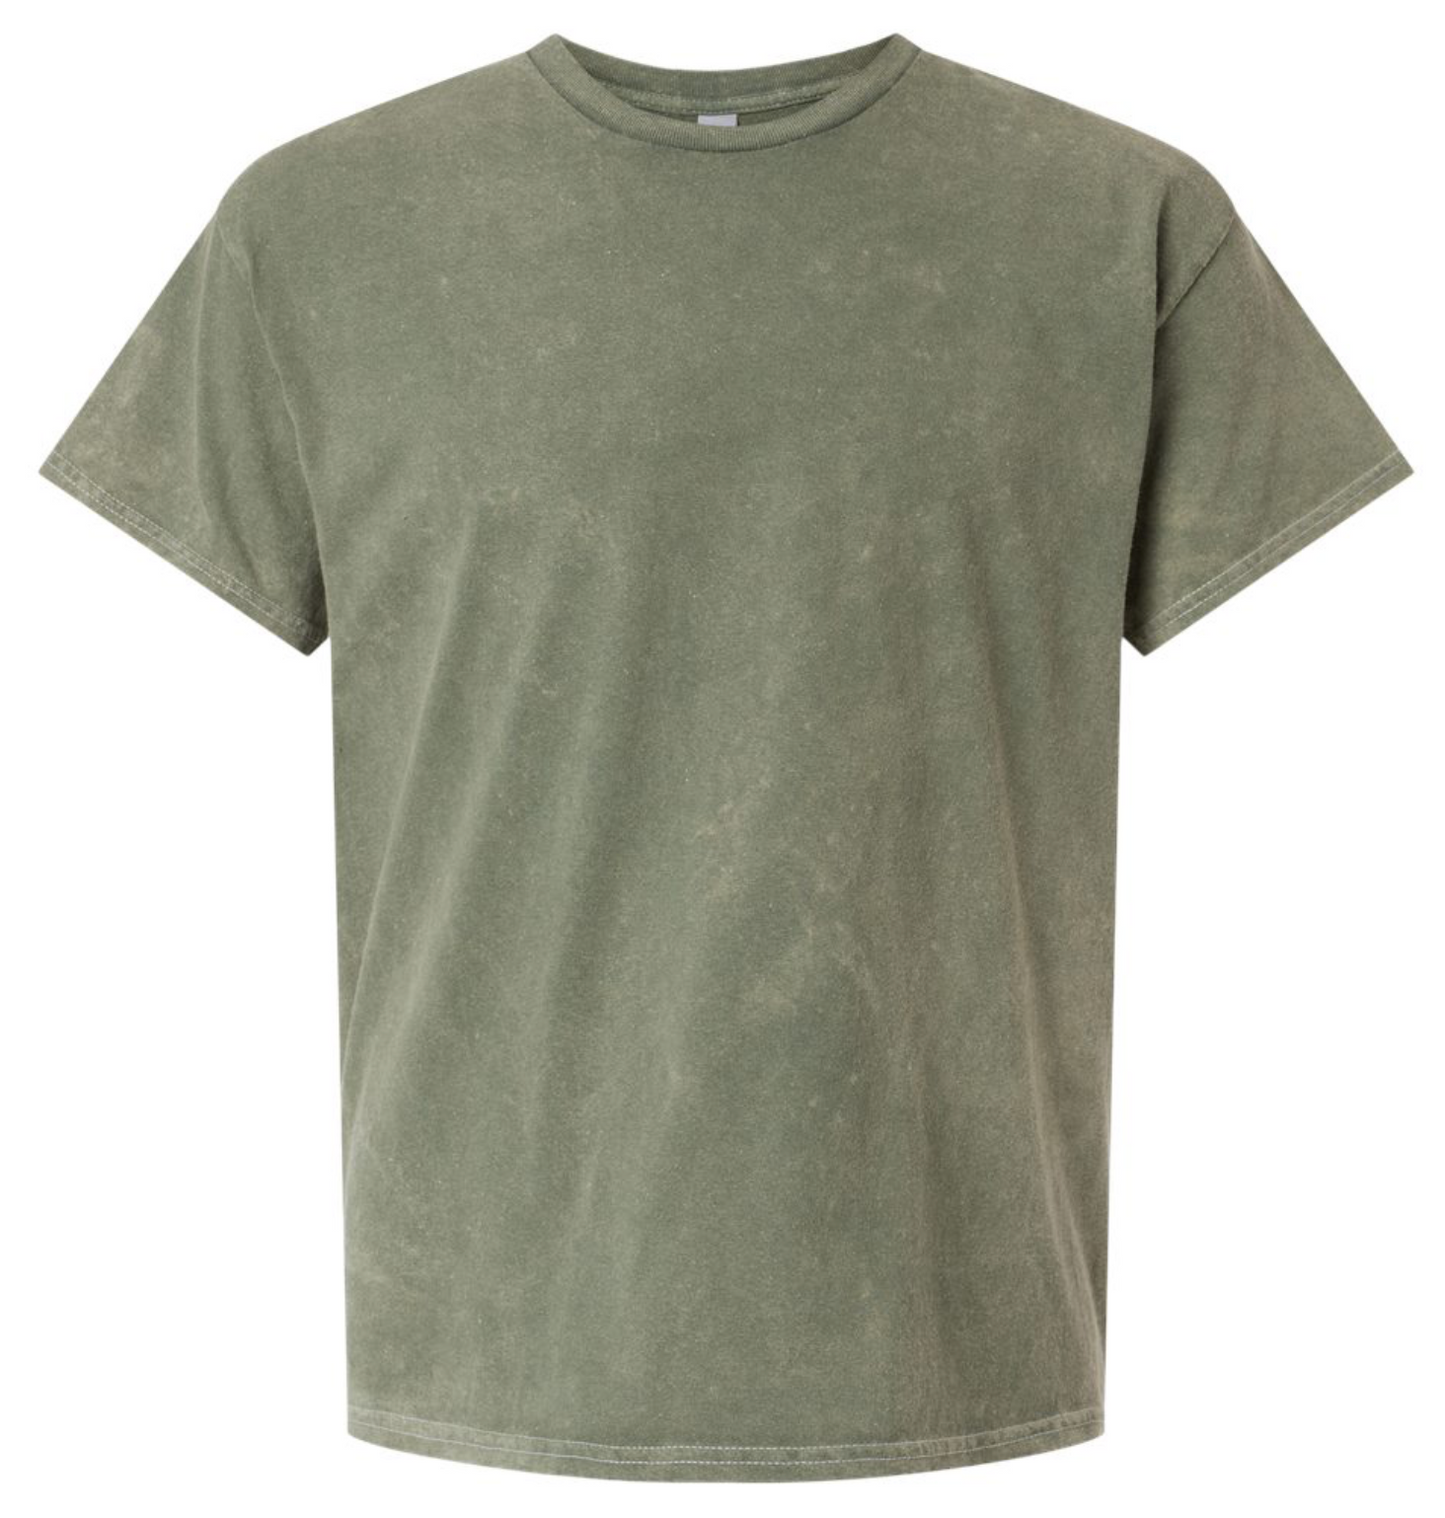 Mineral Washed T-shirt